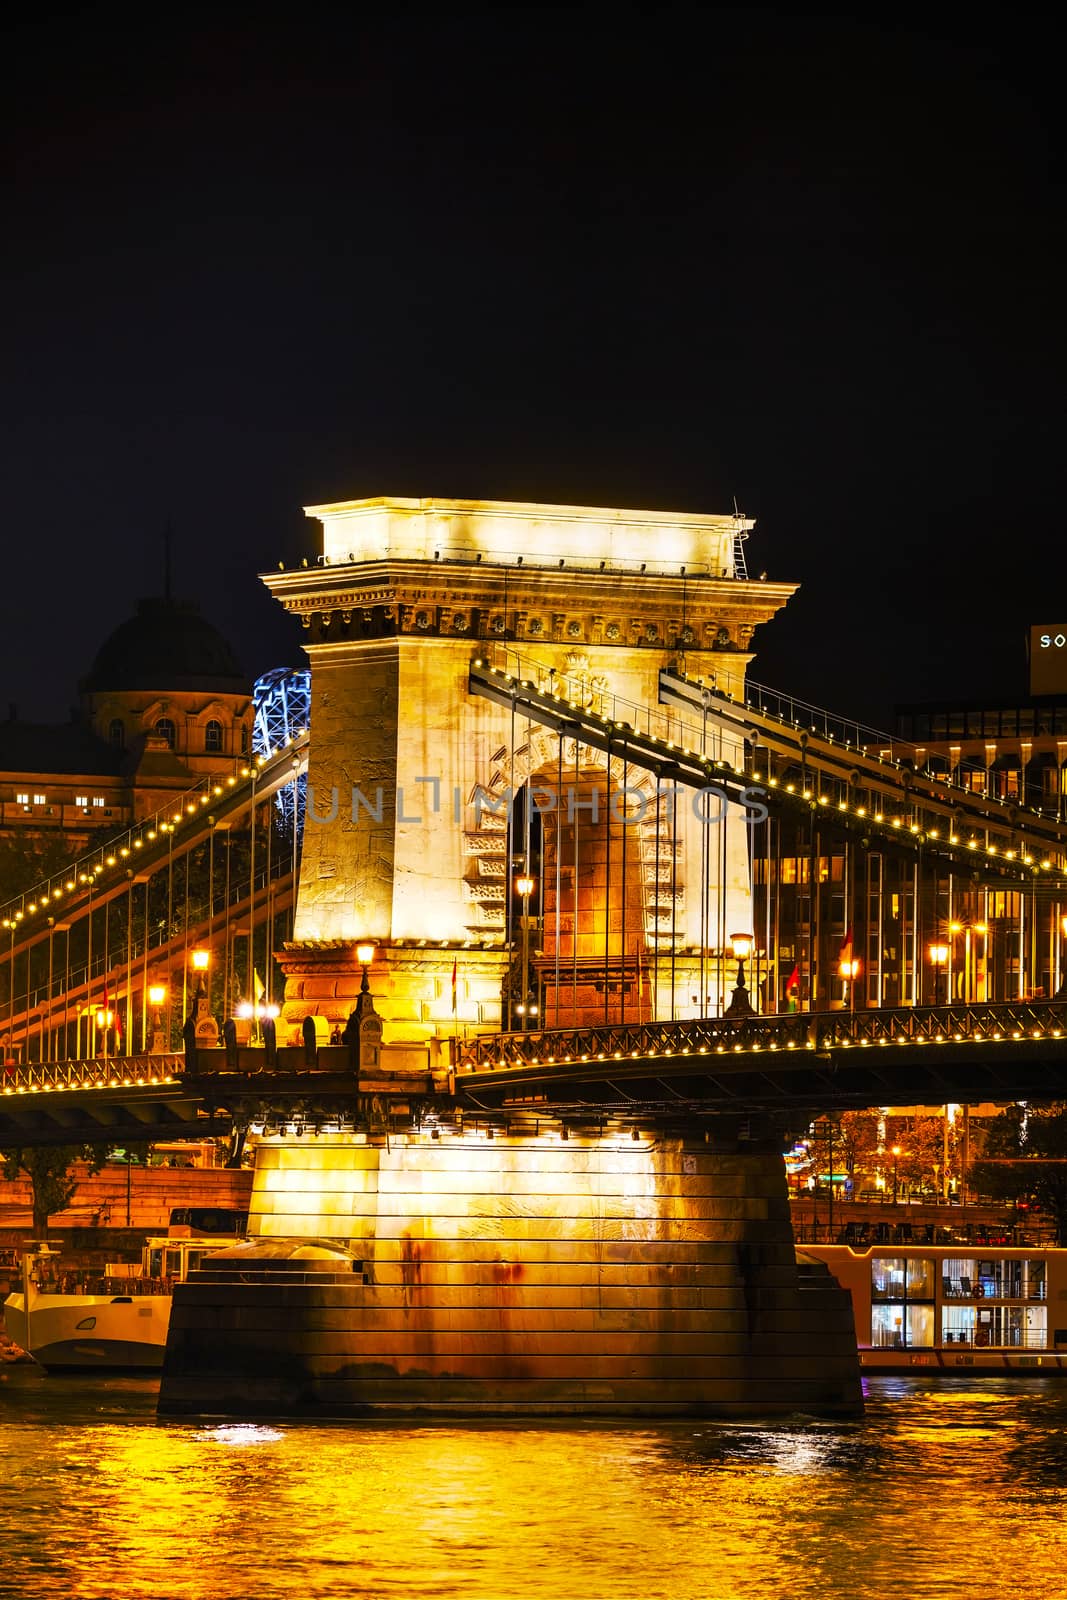 The Szechenyi Chain Bridge in Budapest by AndreyKr